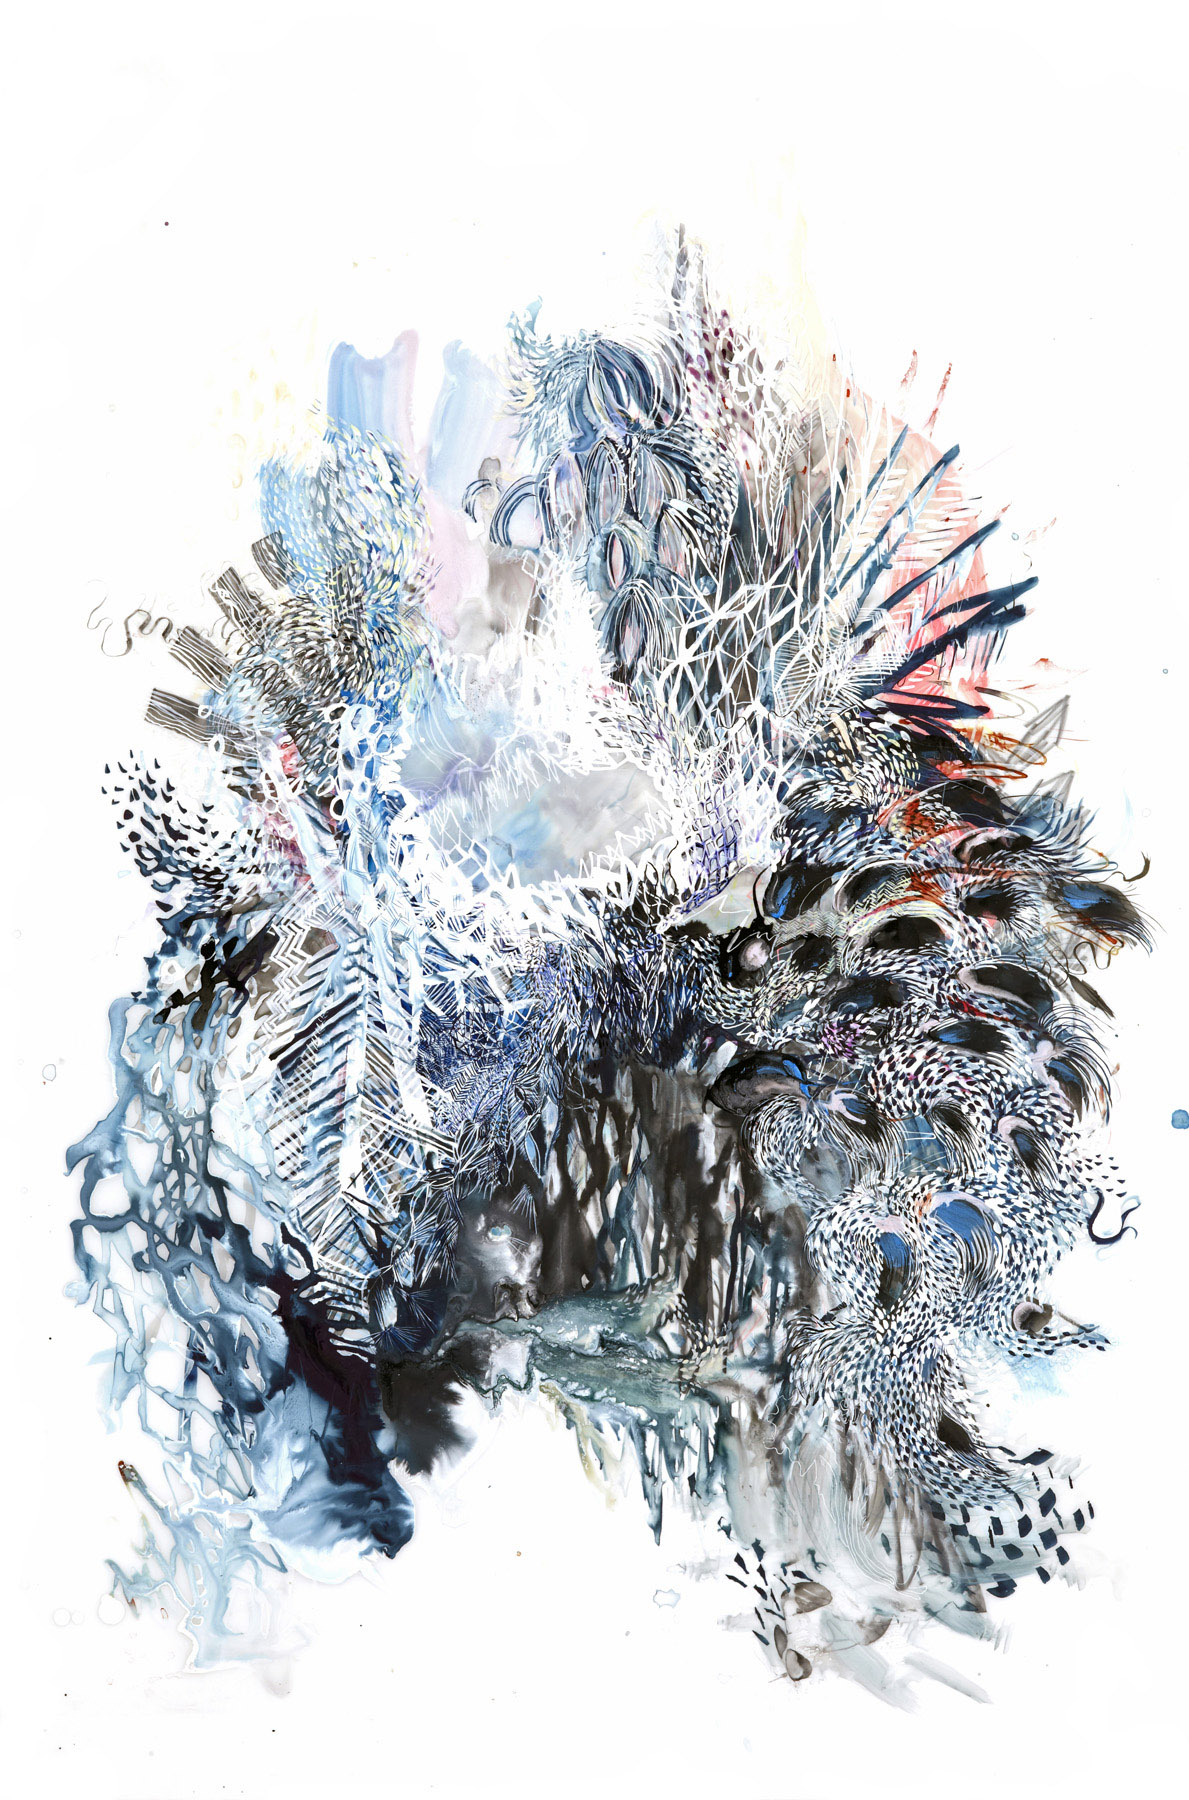  Paola Oxoa  Second Nature 10 , 2011,  Ink, gouache, and graphite on mylar,  36 x 24 in. (91.44 x 60.96 cm) 